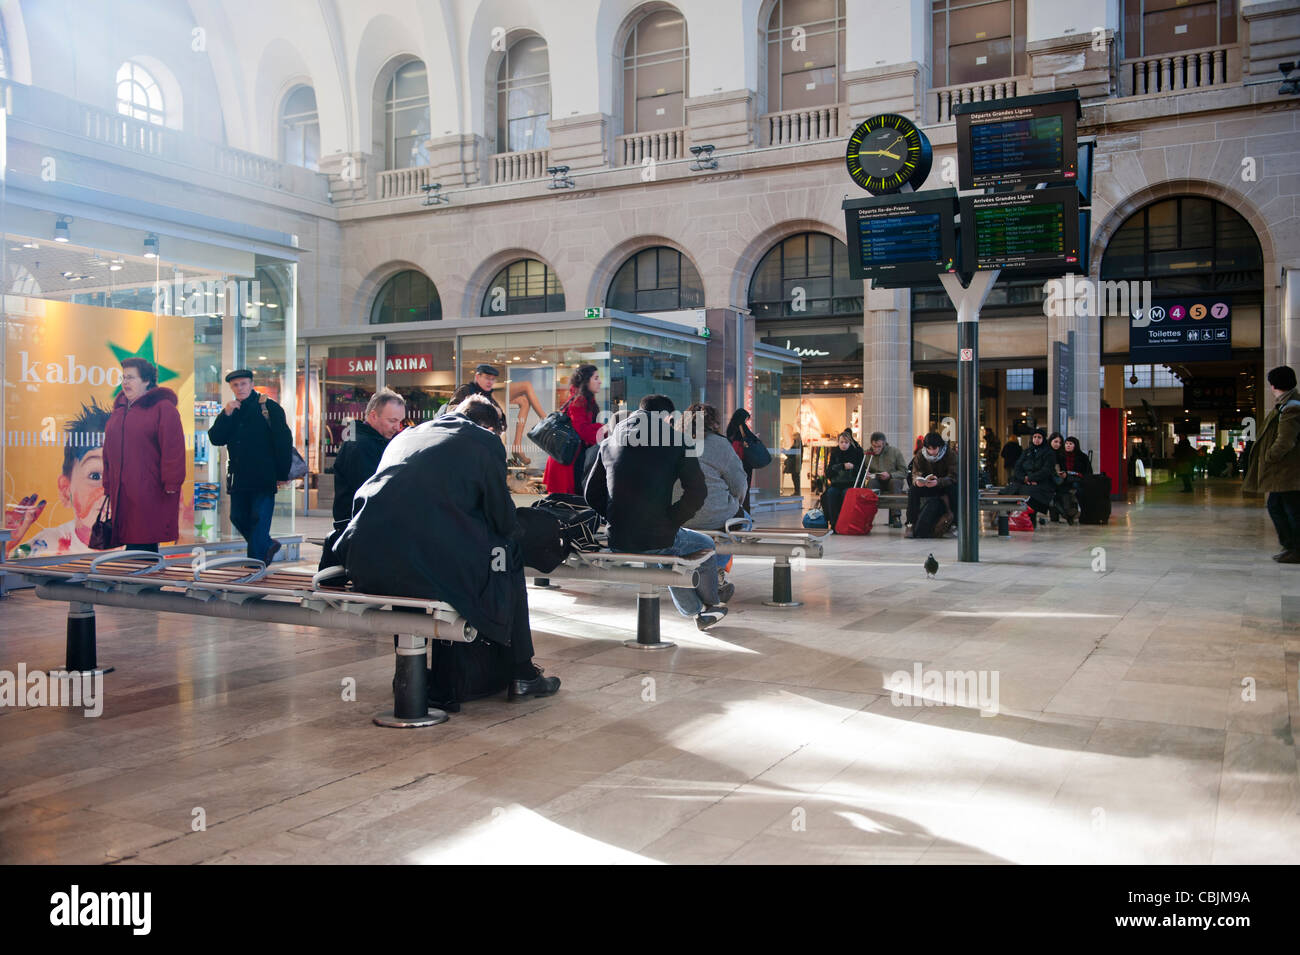 People sitting in a waiting area in the Gare de l'est train rail railway station in Paris, France. Stock Photo